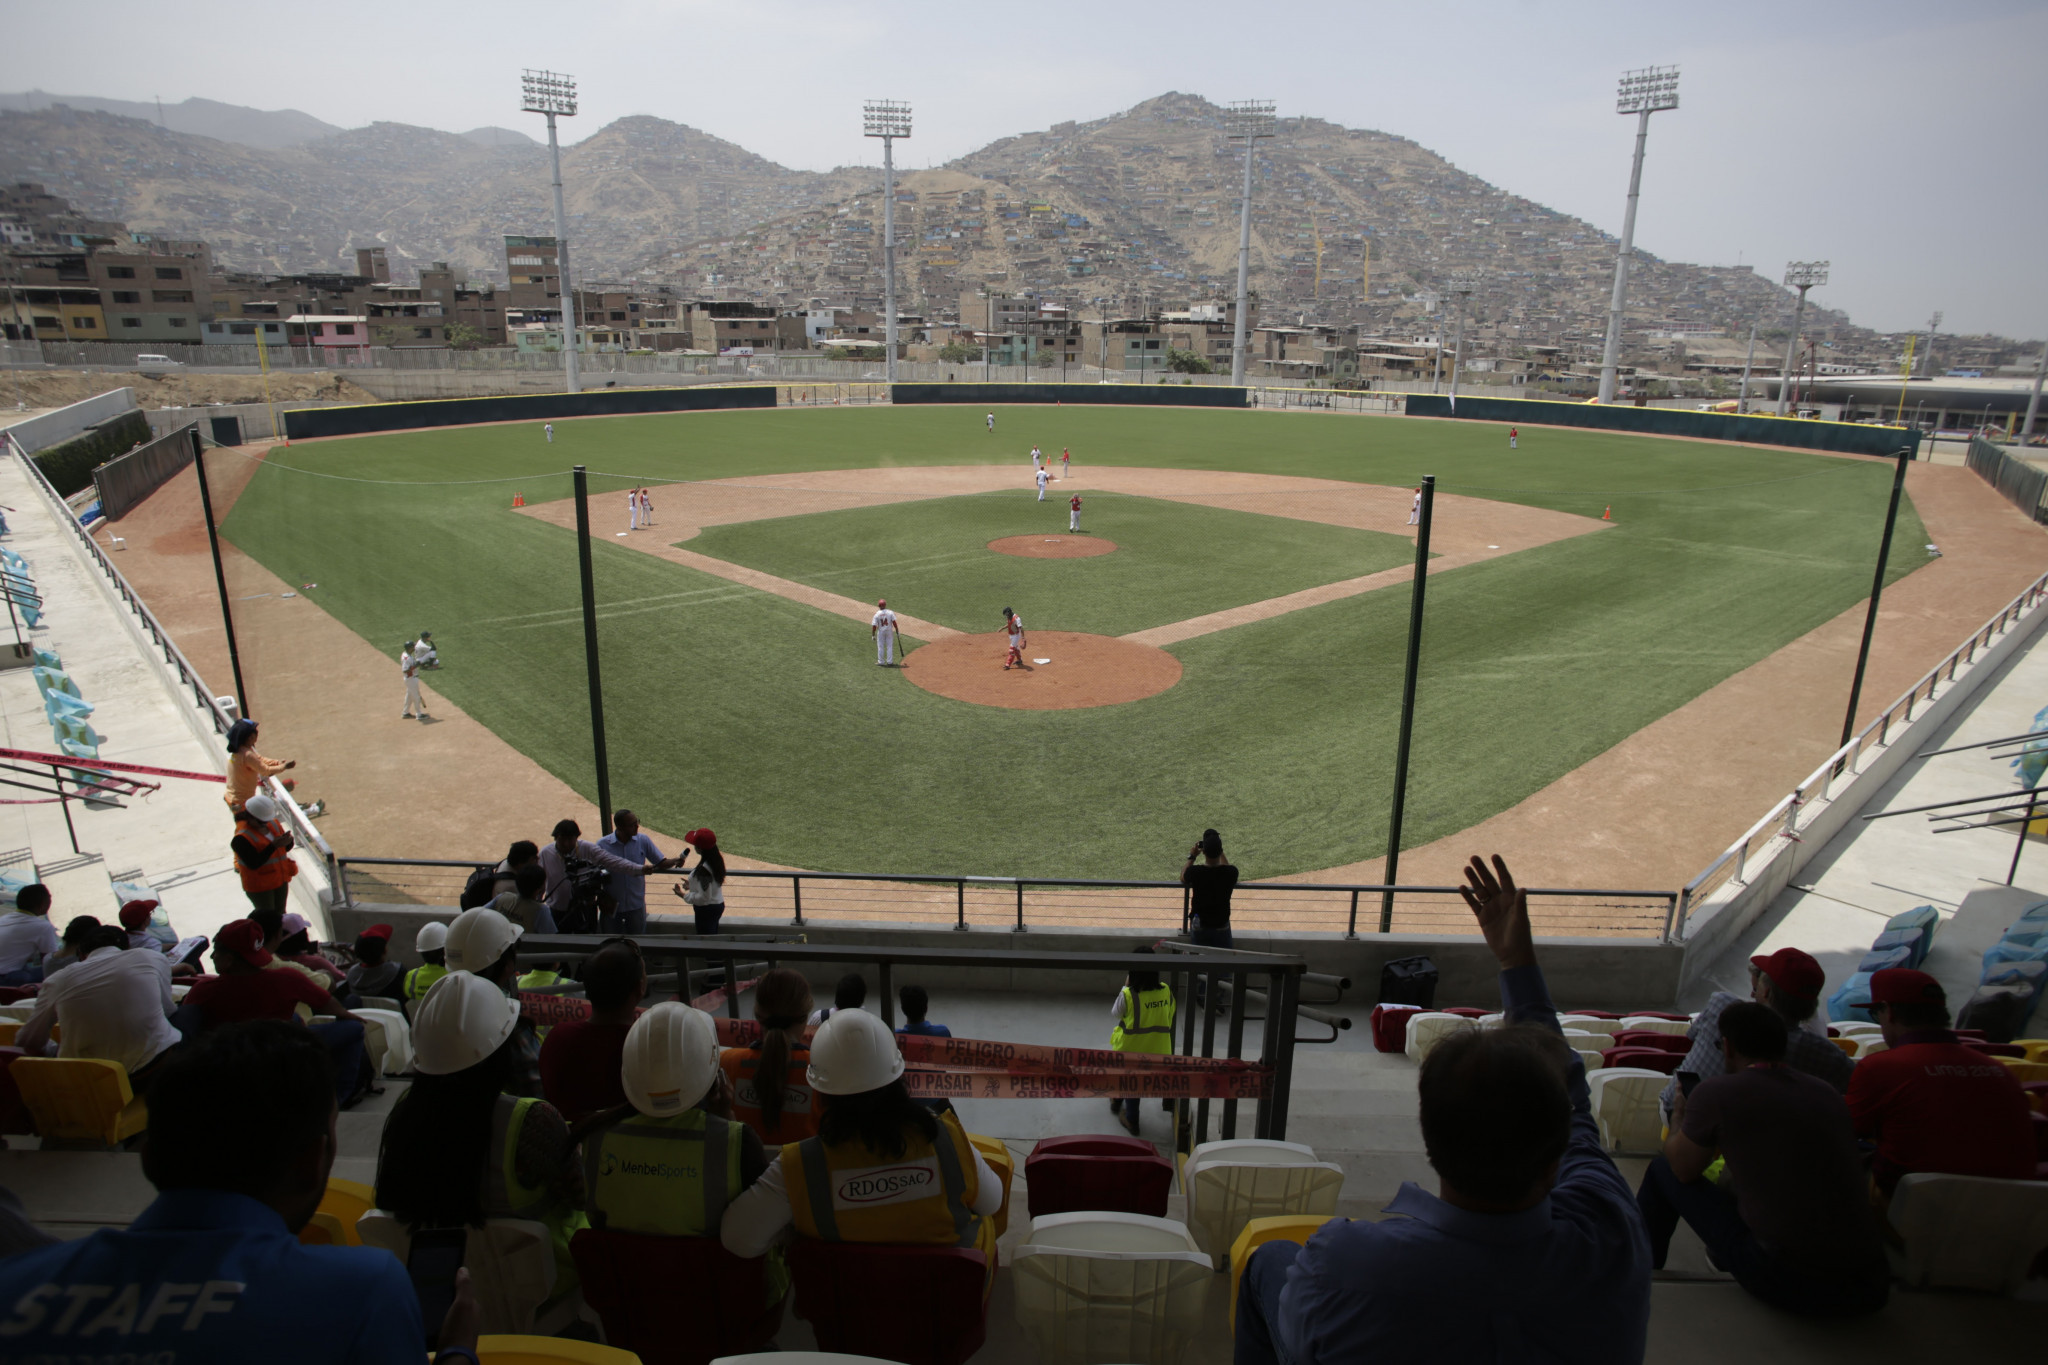 The baseball stadium features a World Baseball Softball Confederation-approved field, changing rooms and seats for 1,800 spectators ©Lima 2019